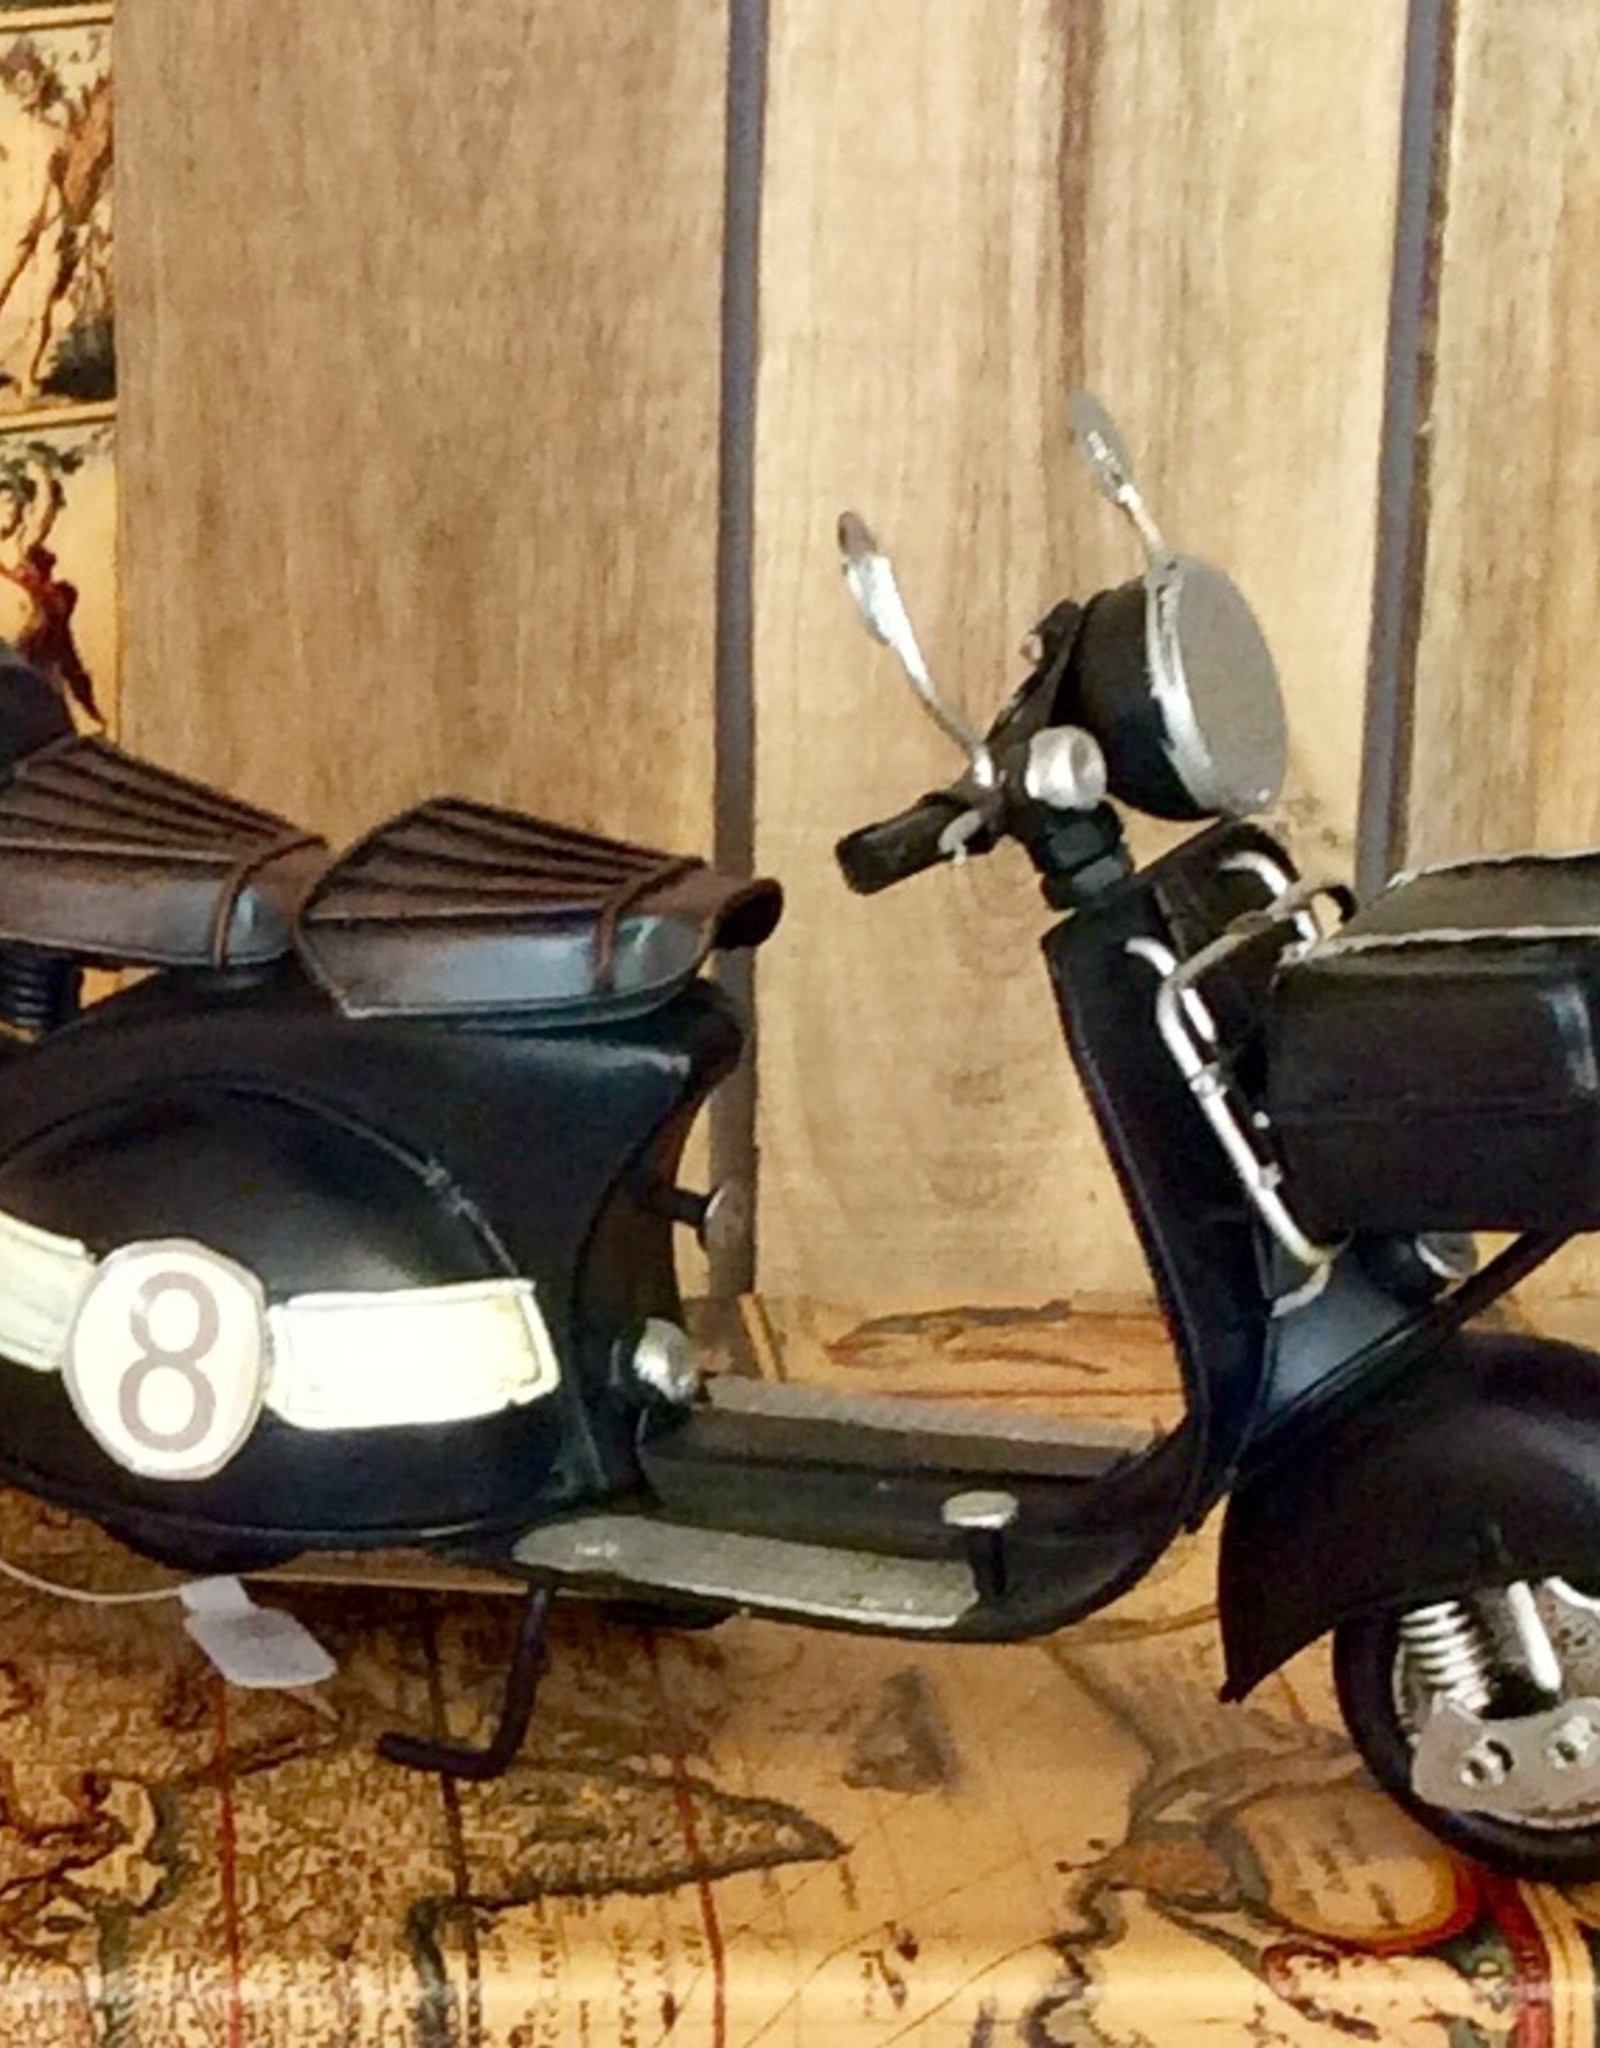 Model  scooter